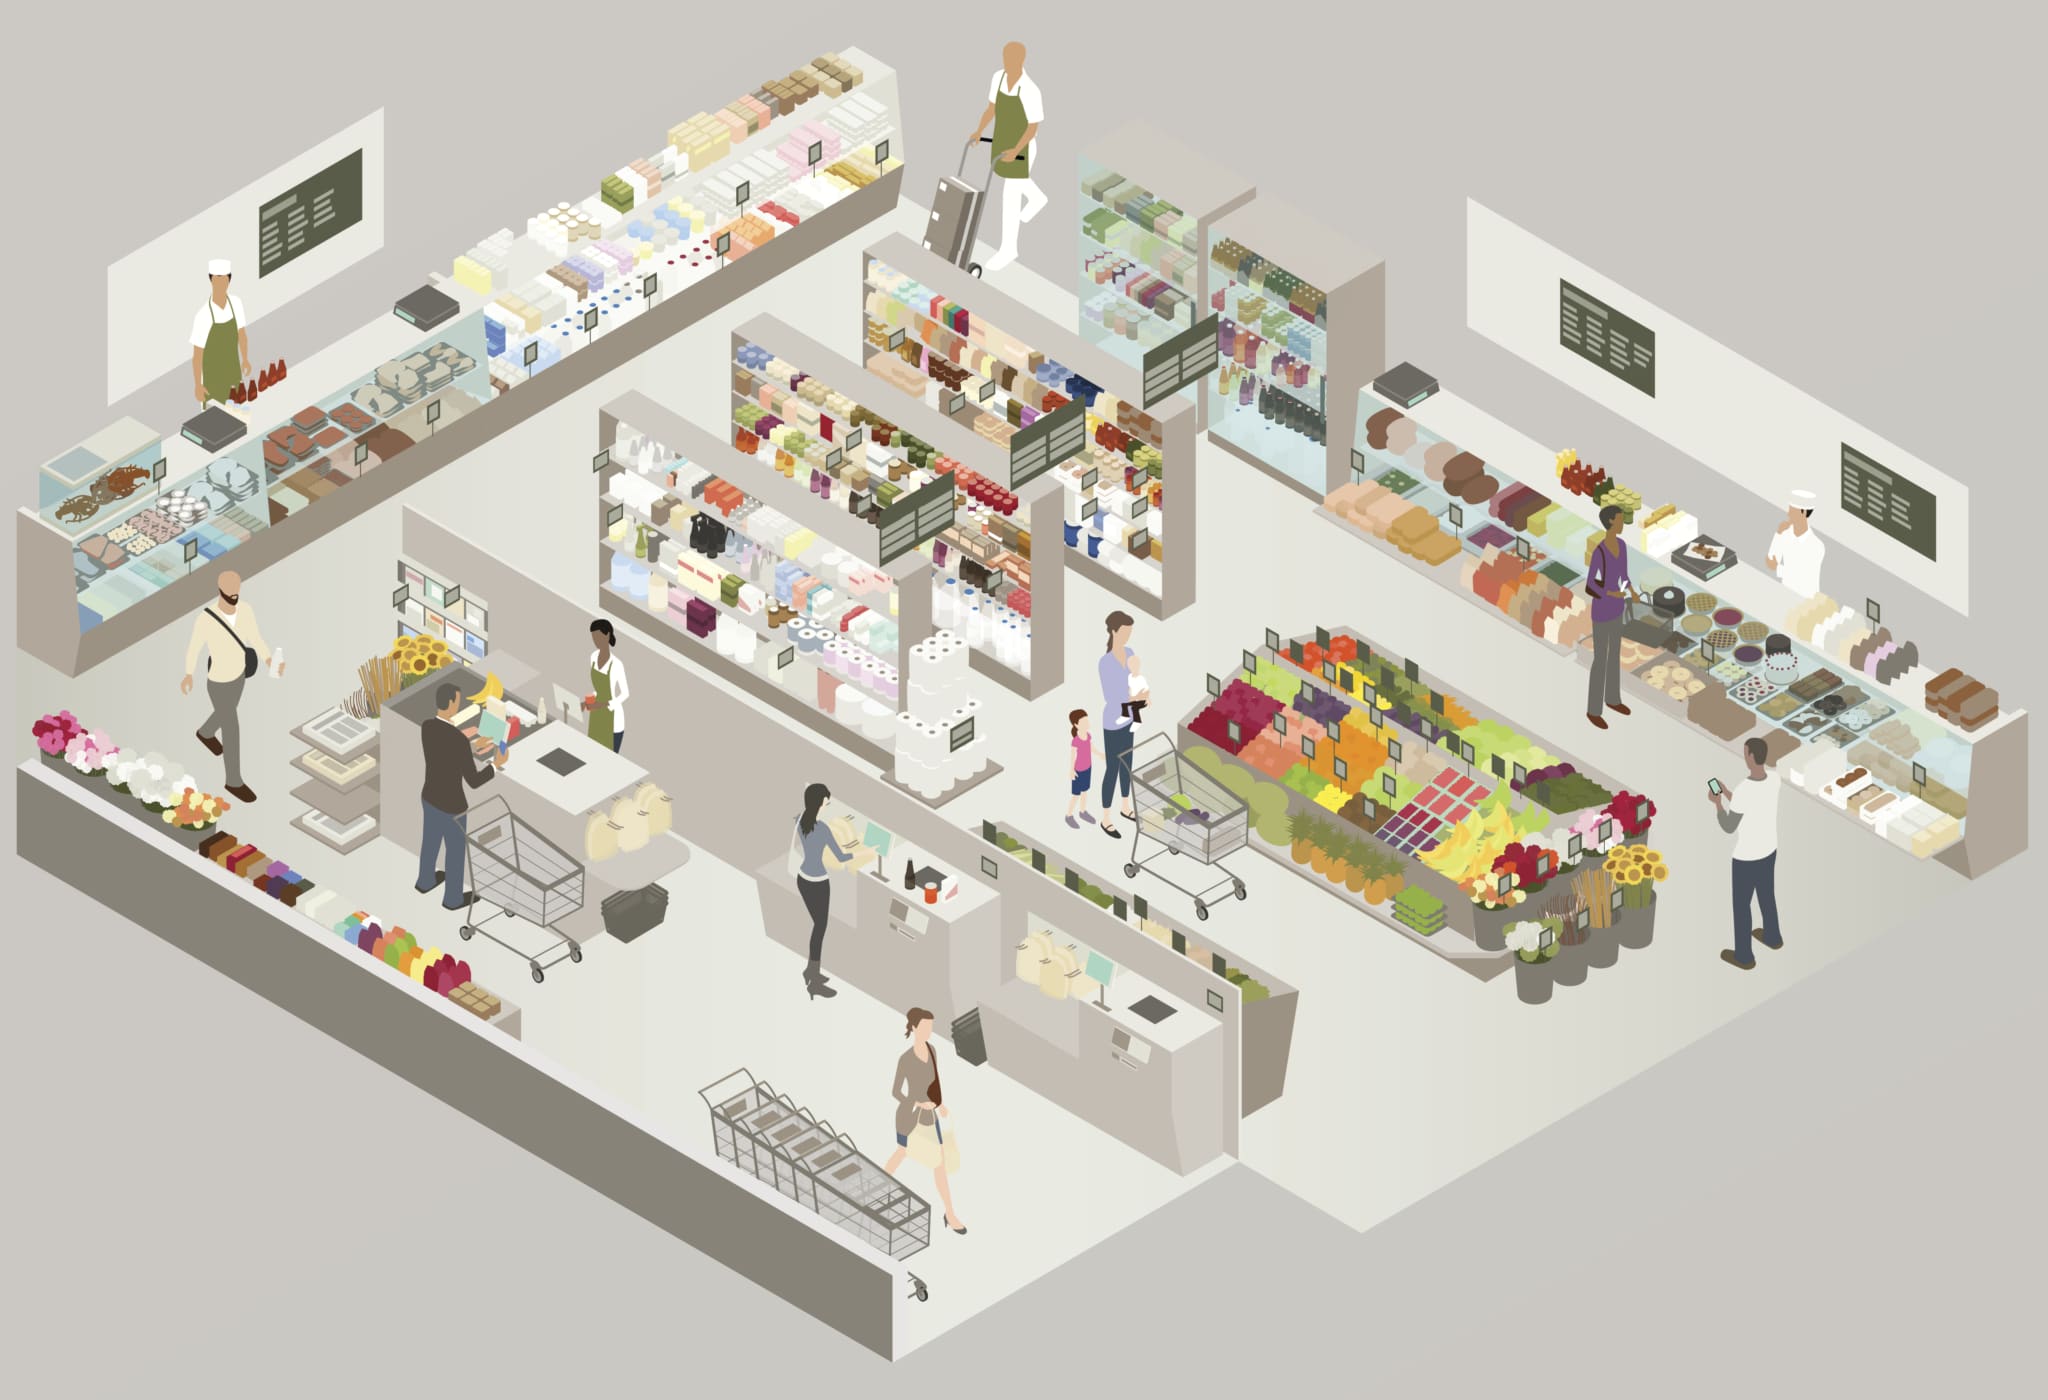 Interior of a grocery store is illustrated in isometric view. Includes produce section, bakery, deli, frozen foods, dairy, butcher and seafood counters, cashier, and self-checkout. Other details include customers, employees, shopping carts, and hundreds of packaged goods lining the shelves.